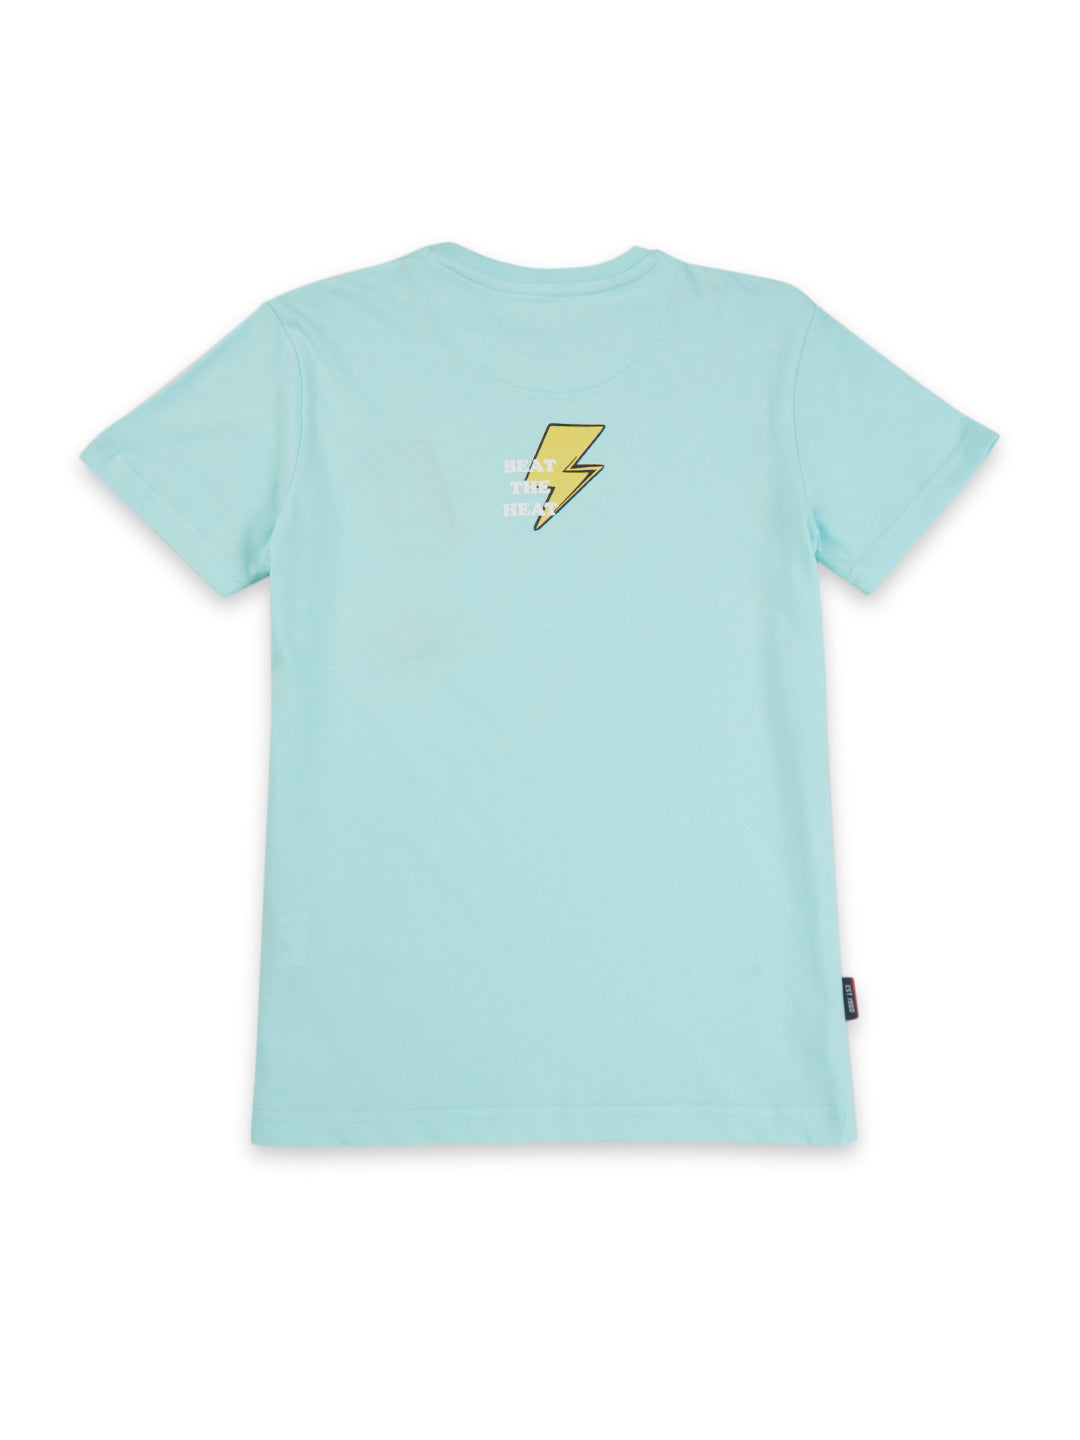 Boys Turquoise Cotton Solid T-Shirt